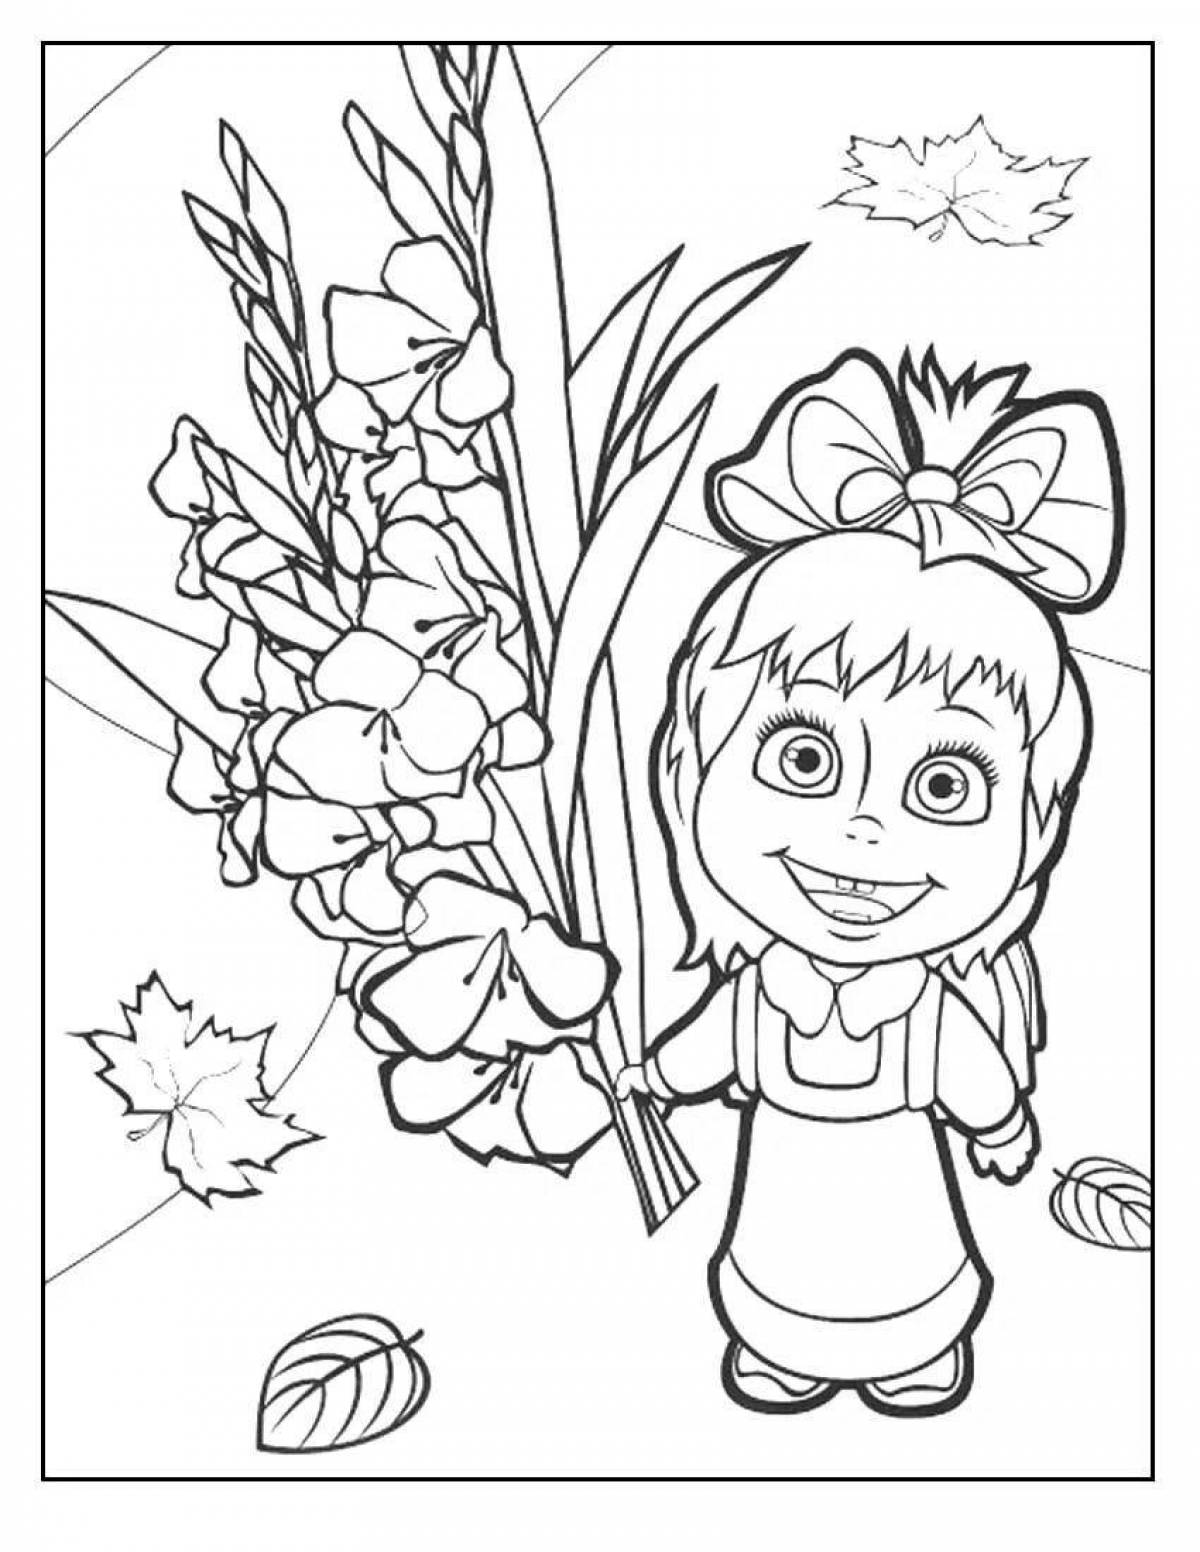 Delightful masha and the bear coloring book